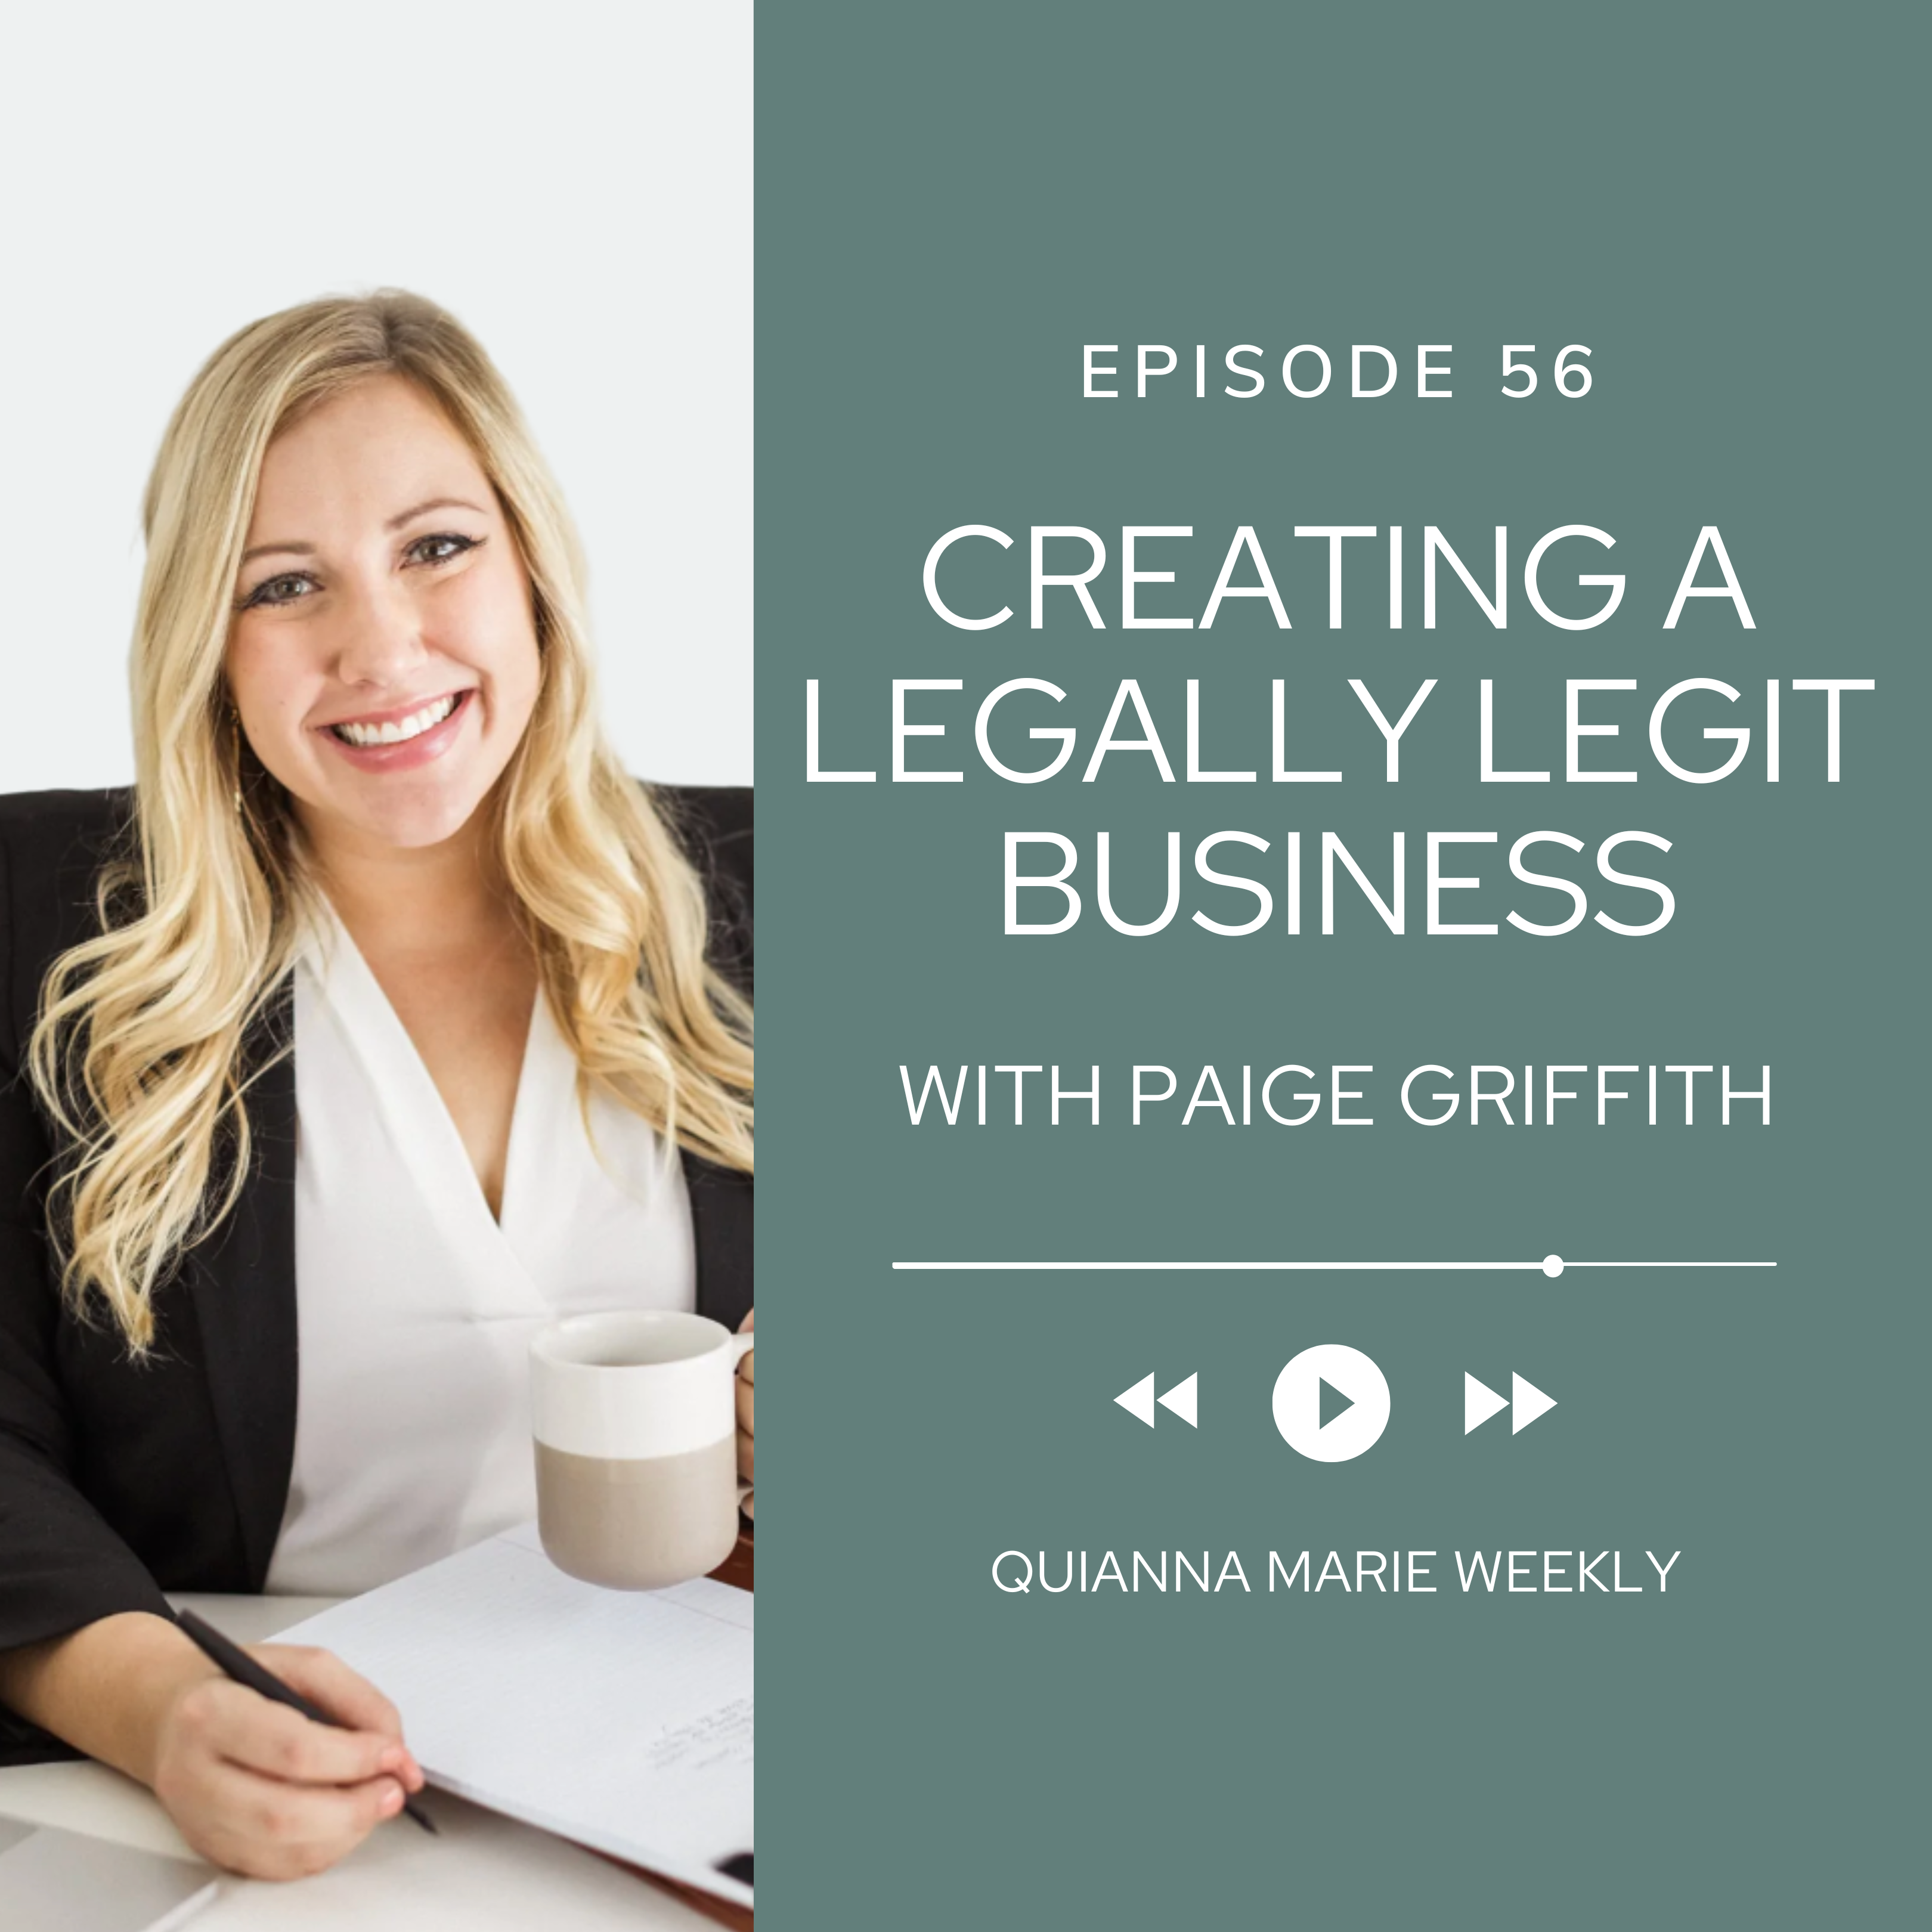 Creating a Legally Legit Business with Paige Griffith - Quianna Marie Weekly